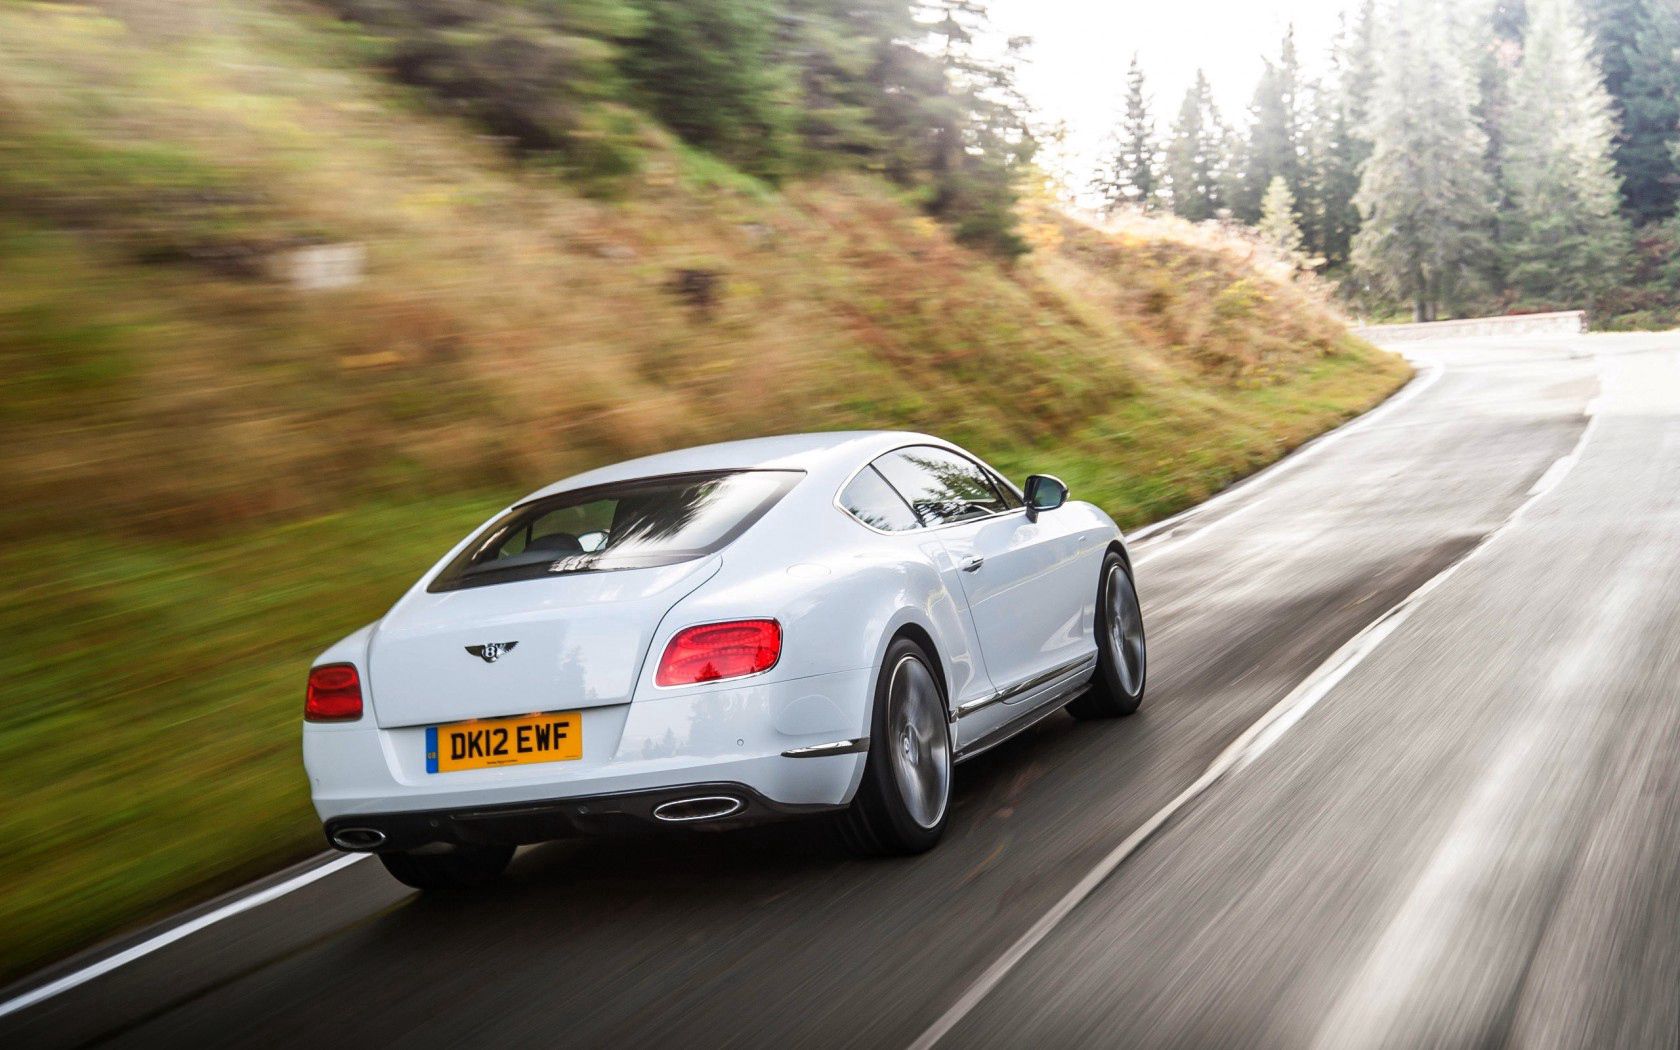 cars, gt, auto, bentley, white, traffic, movement, back view, rear view, continental Full HD